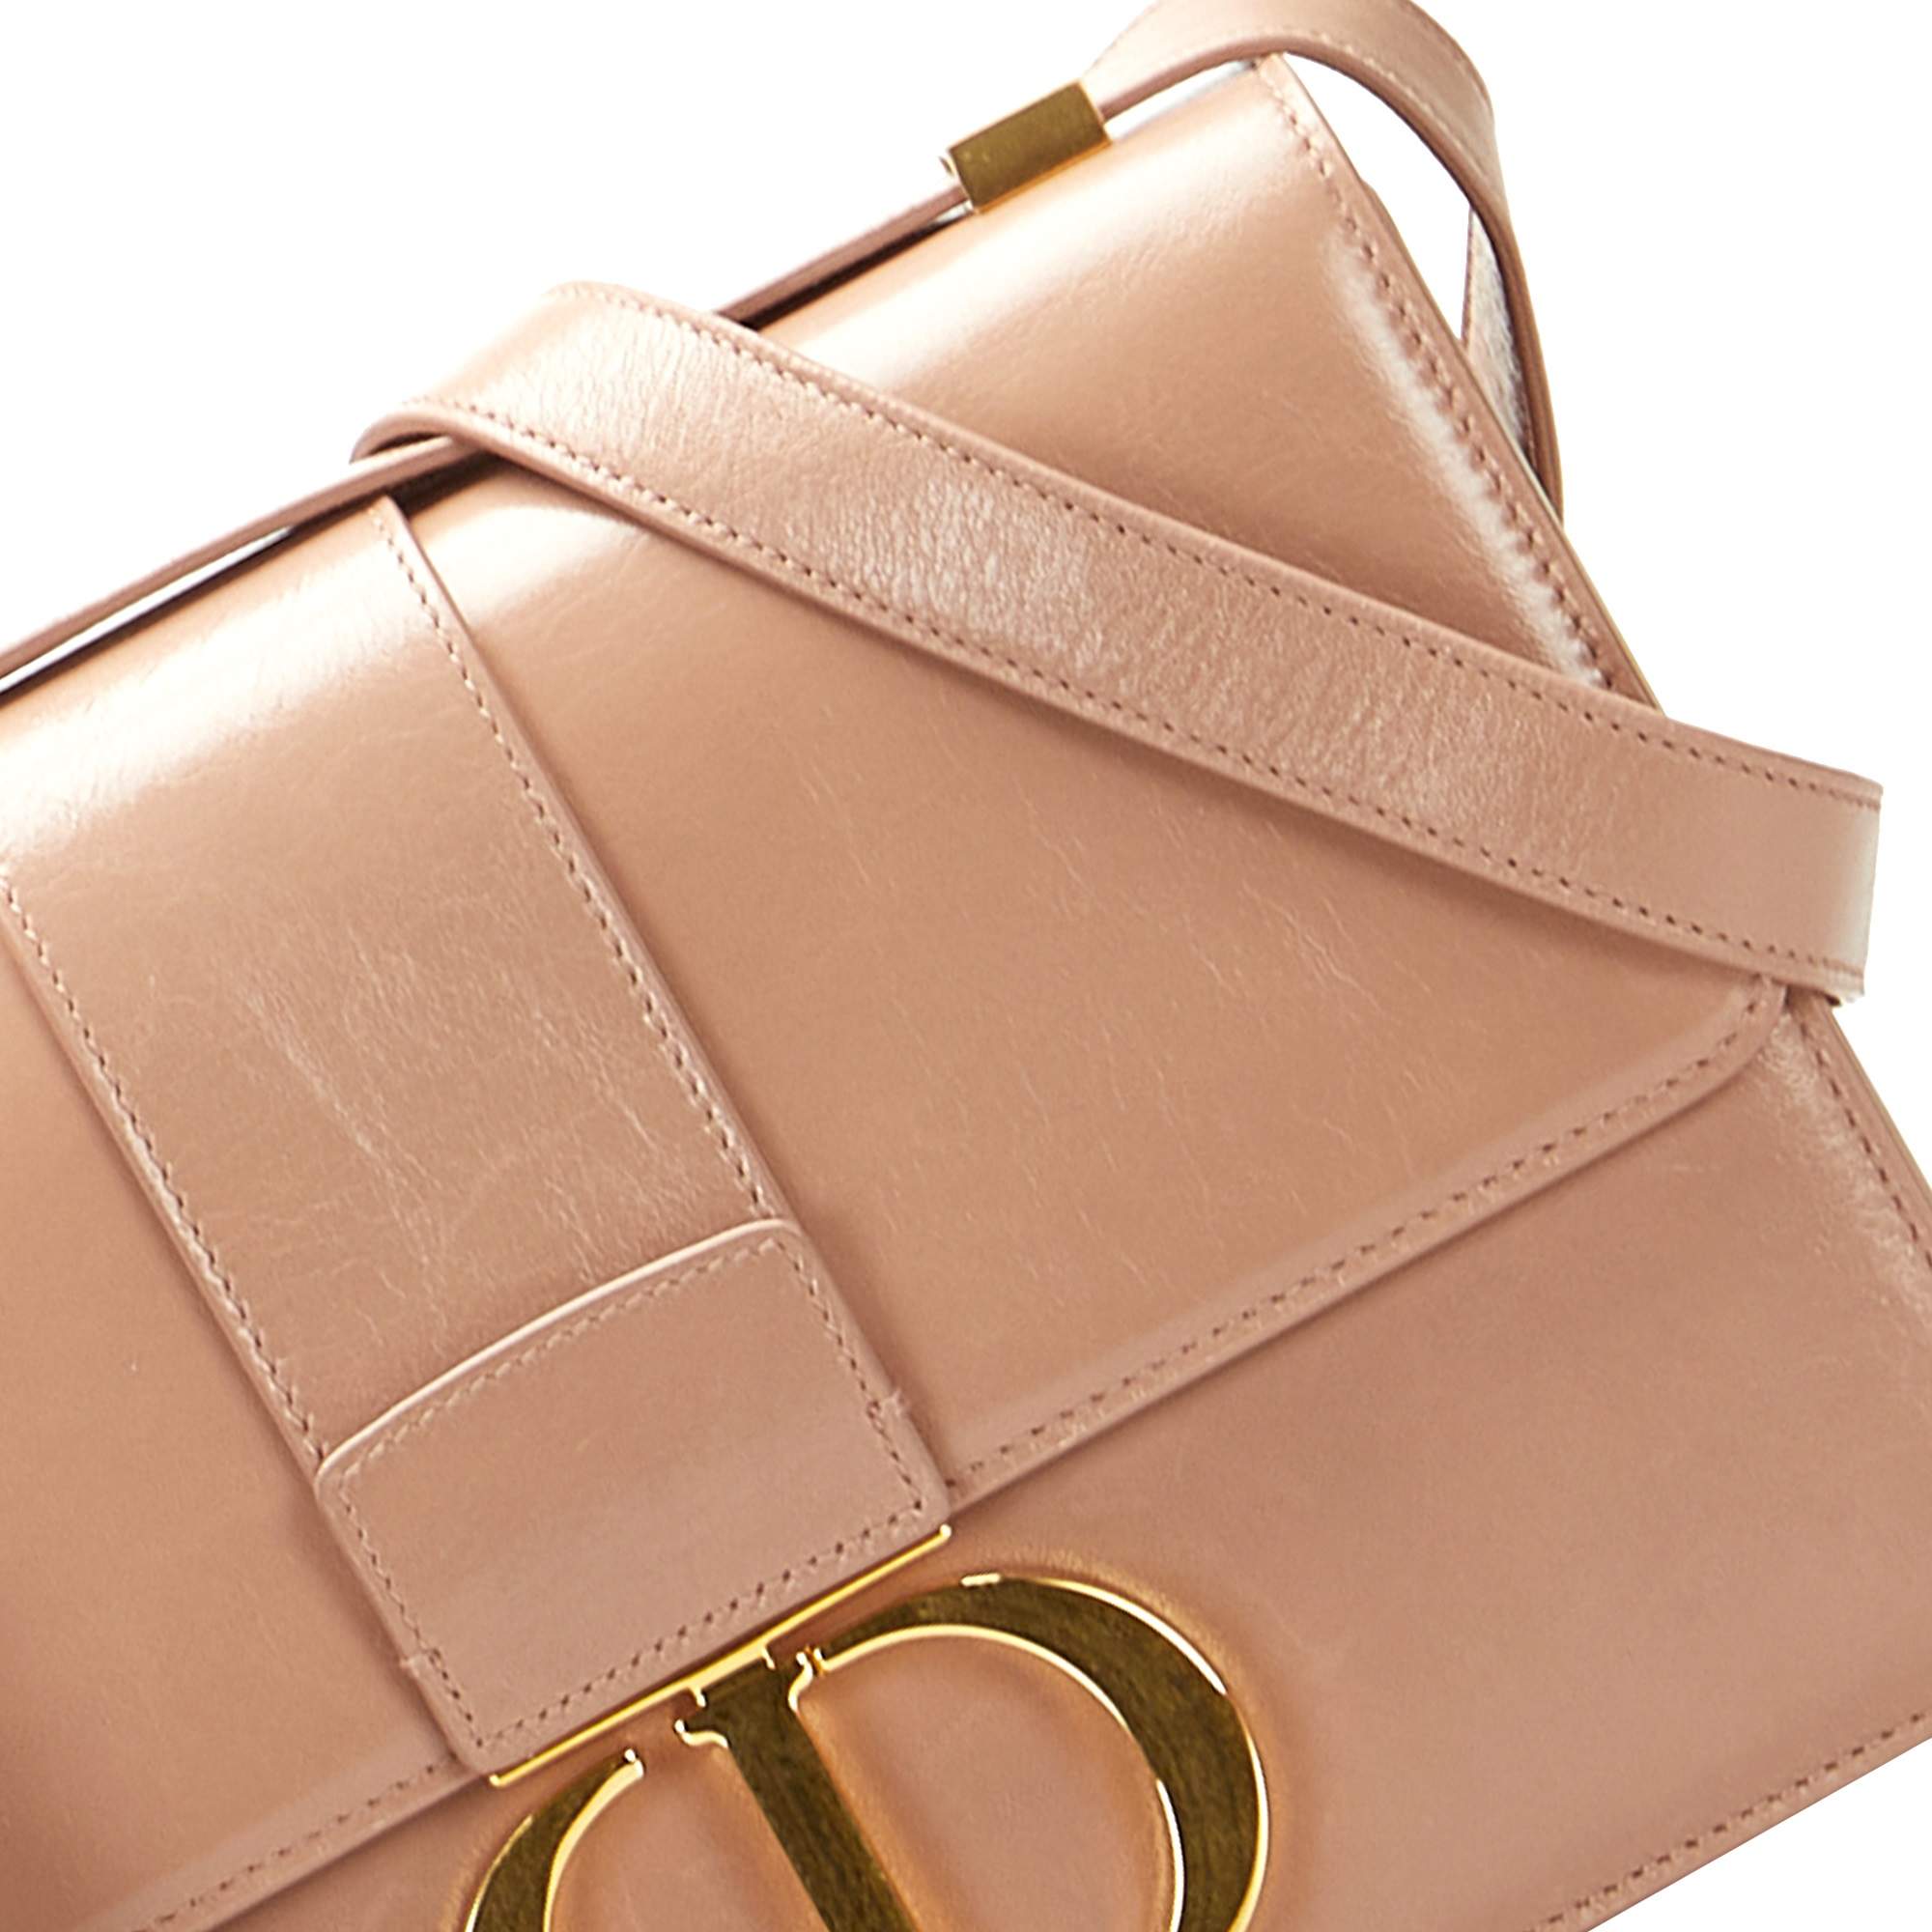 Dior Pink Ombre Leather 30 Montaigne Bag